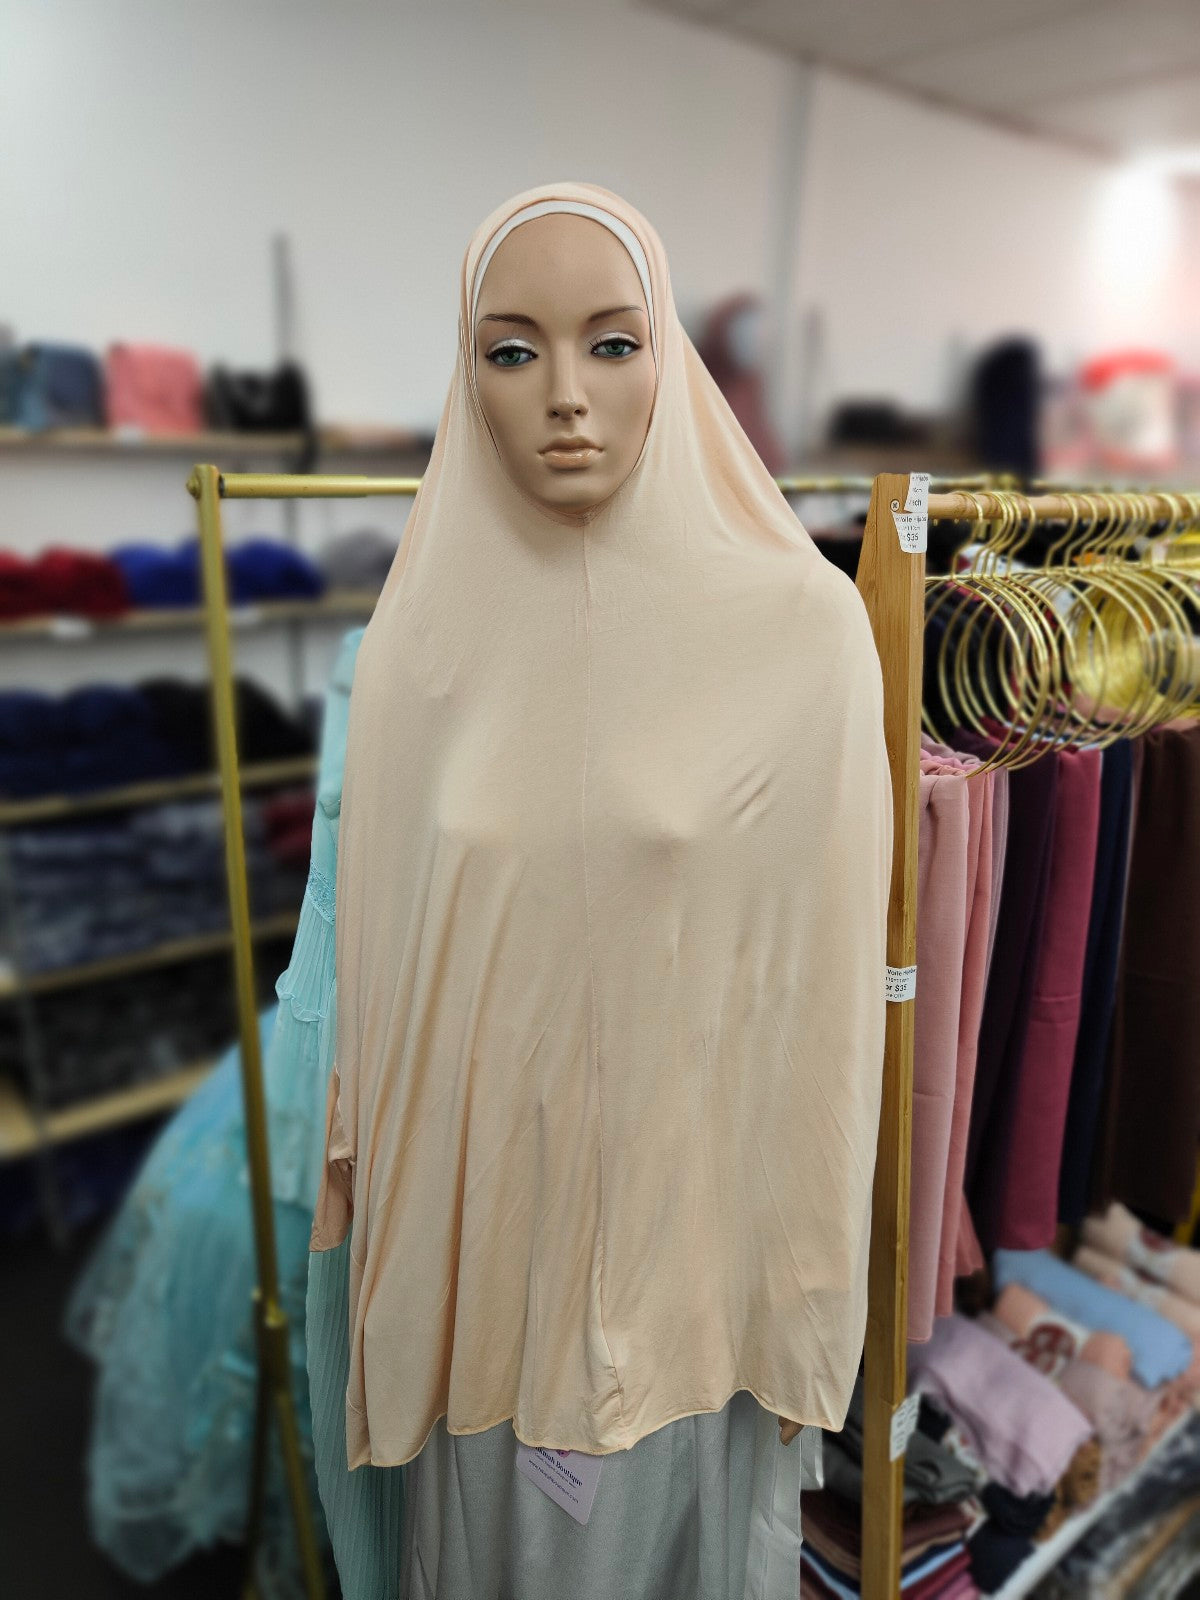 Discover unparalleled comfort with our Champagne Cream Bamboo Jilbab. Lightweight, breathable, and perfect for summer. Perfect for Summer! Lightweight, Breathable, Cool Bamboo Jilbab in Champagne Cream for Hot Weather. Buy the best Bamboo Jilbab online. Ideal for hot weather. Elevate your style at Hikmah Boutique. 